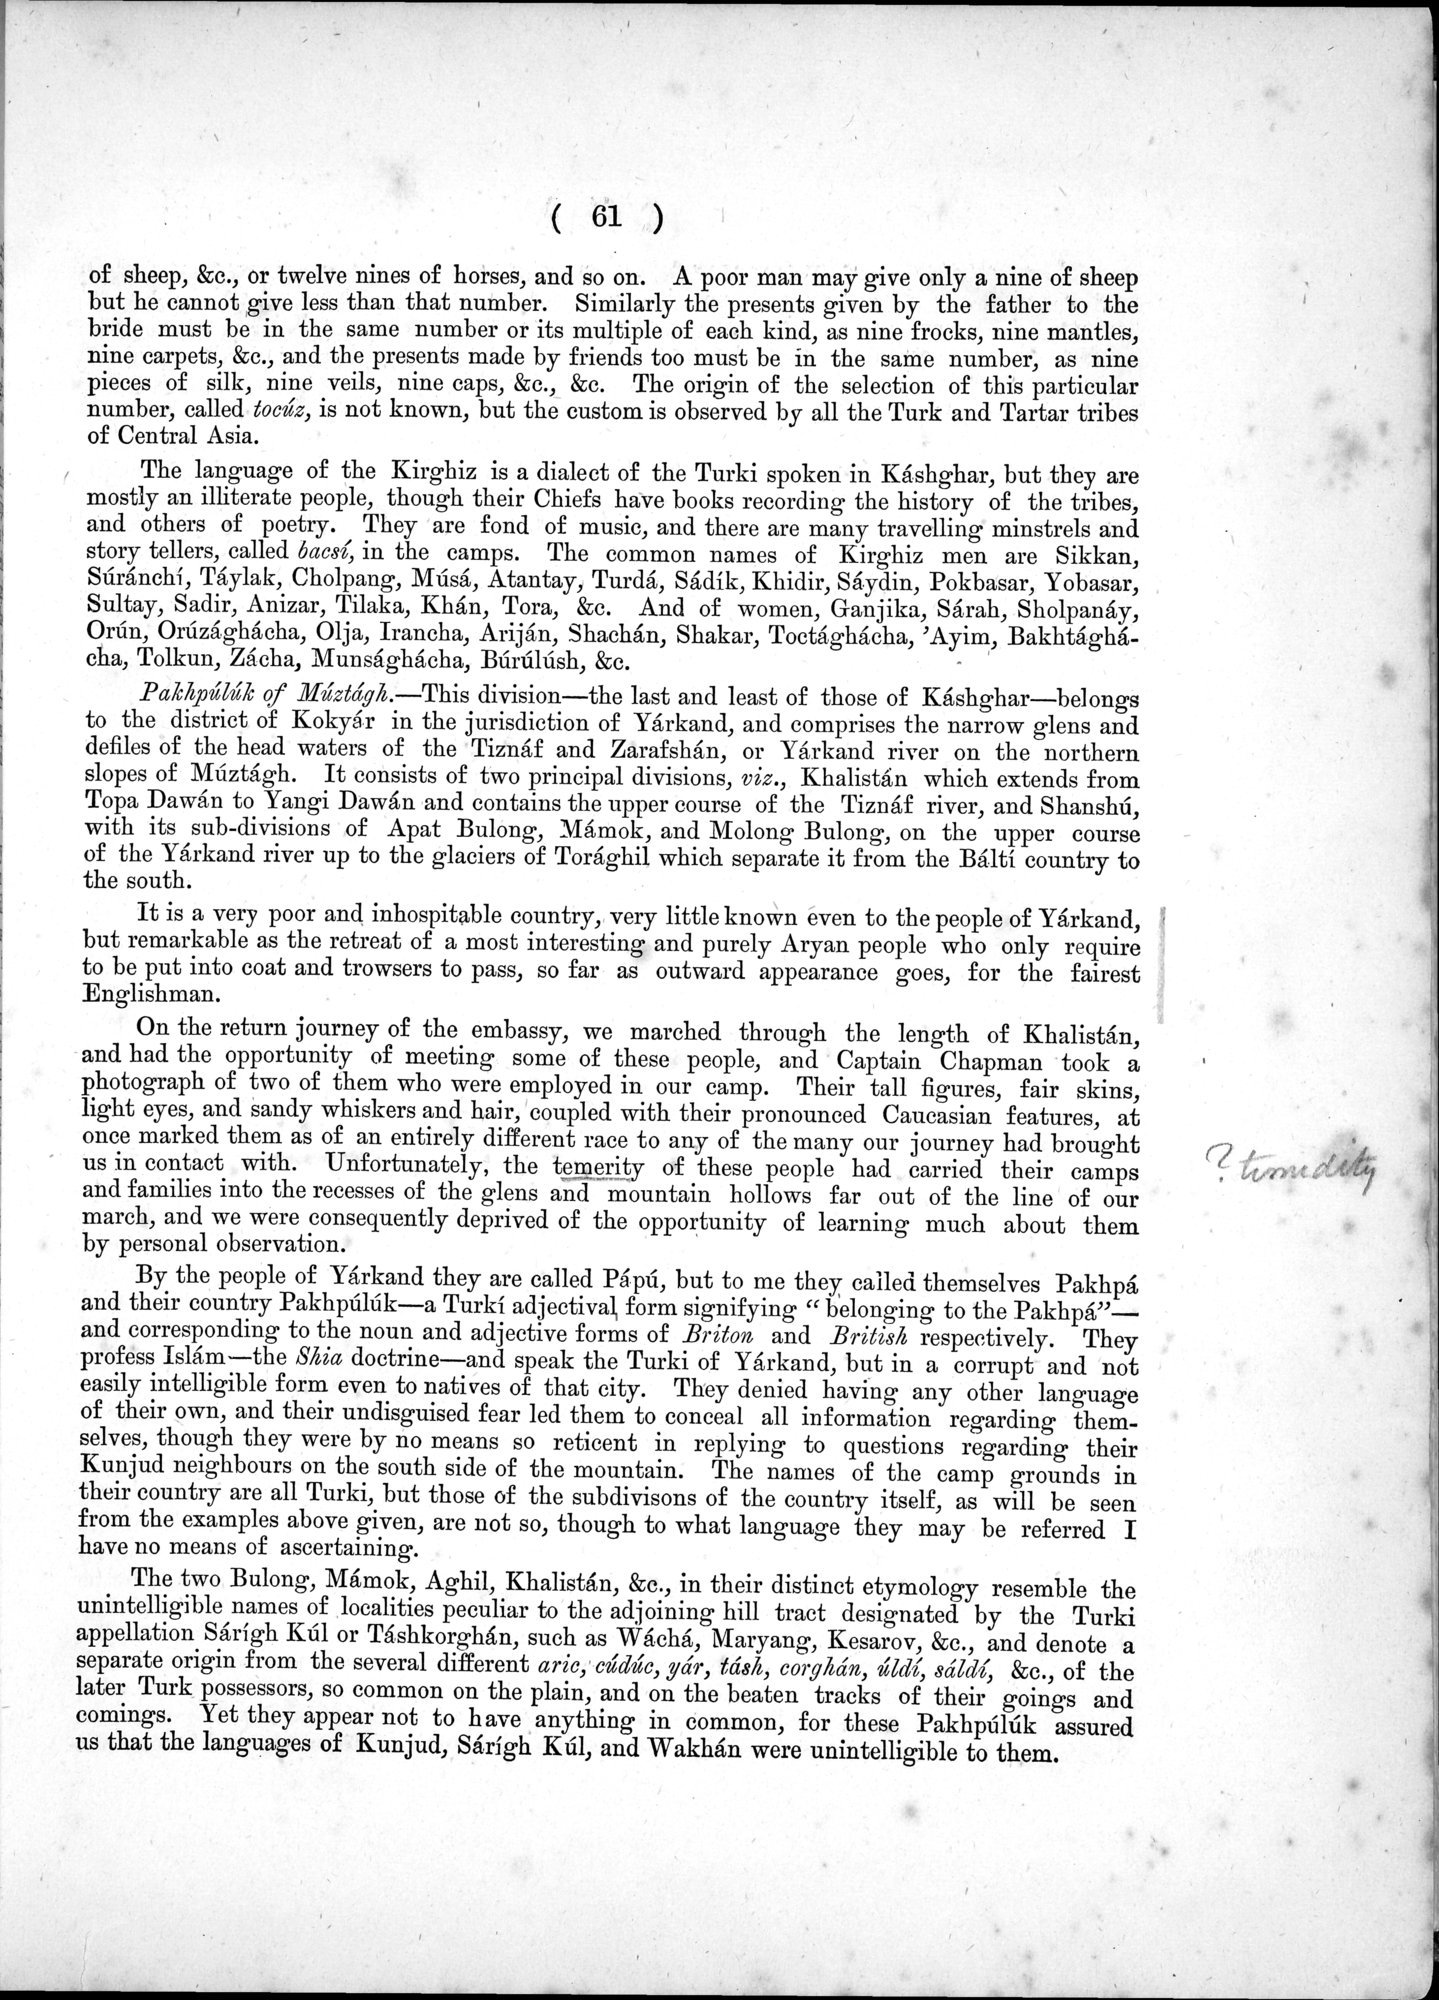 Report of a Mission to Yarkund in 1873 : vol.1 / Page 103 (Grayscale High Resolution Image)